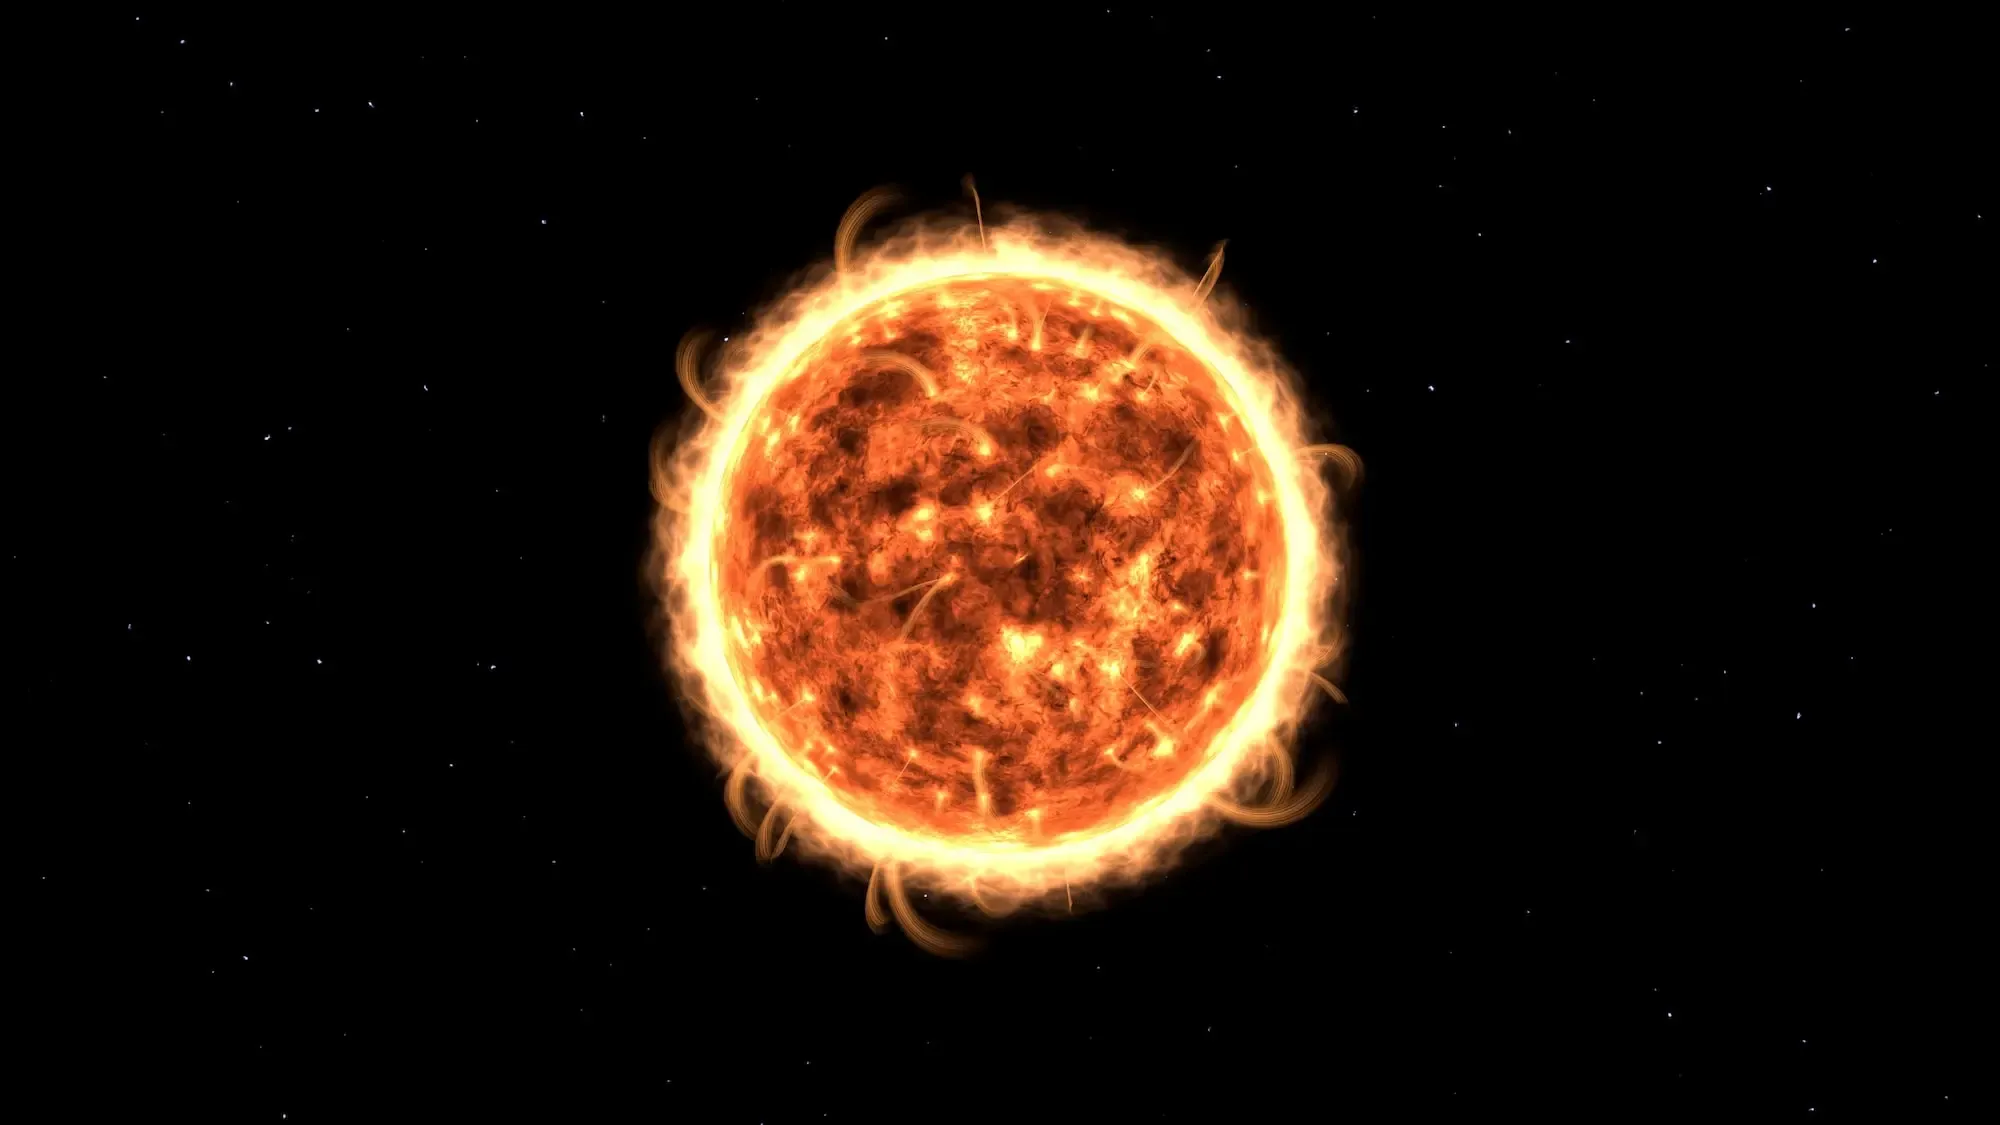 3D visualization of the Sun suspended in space